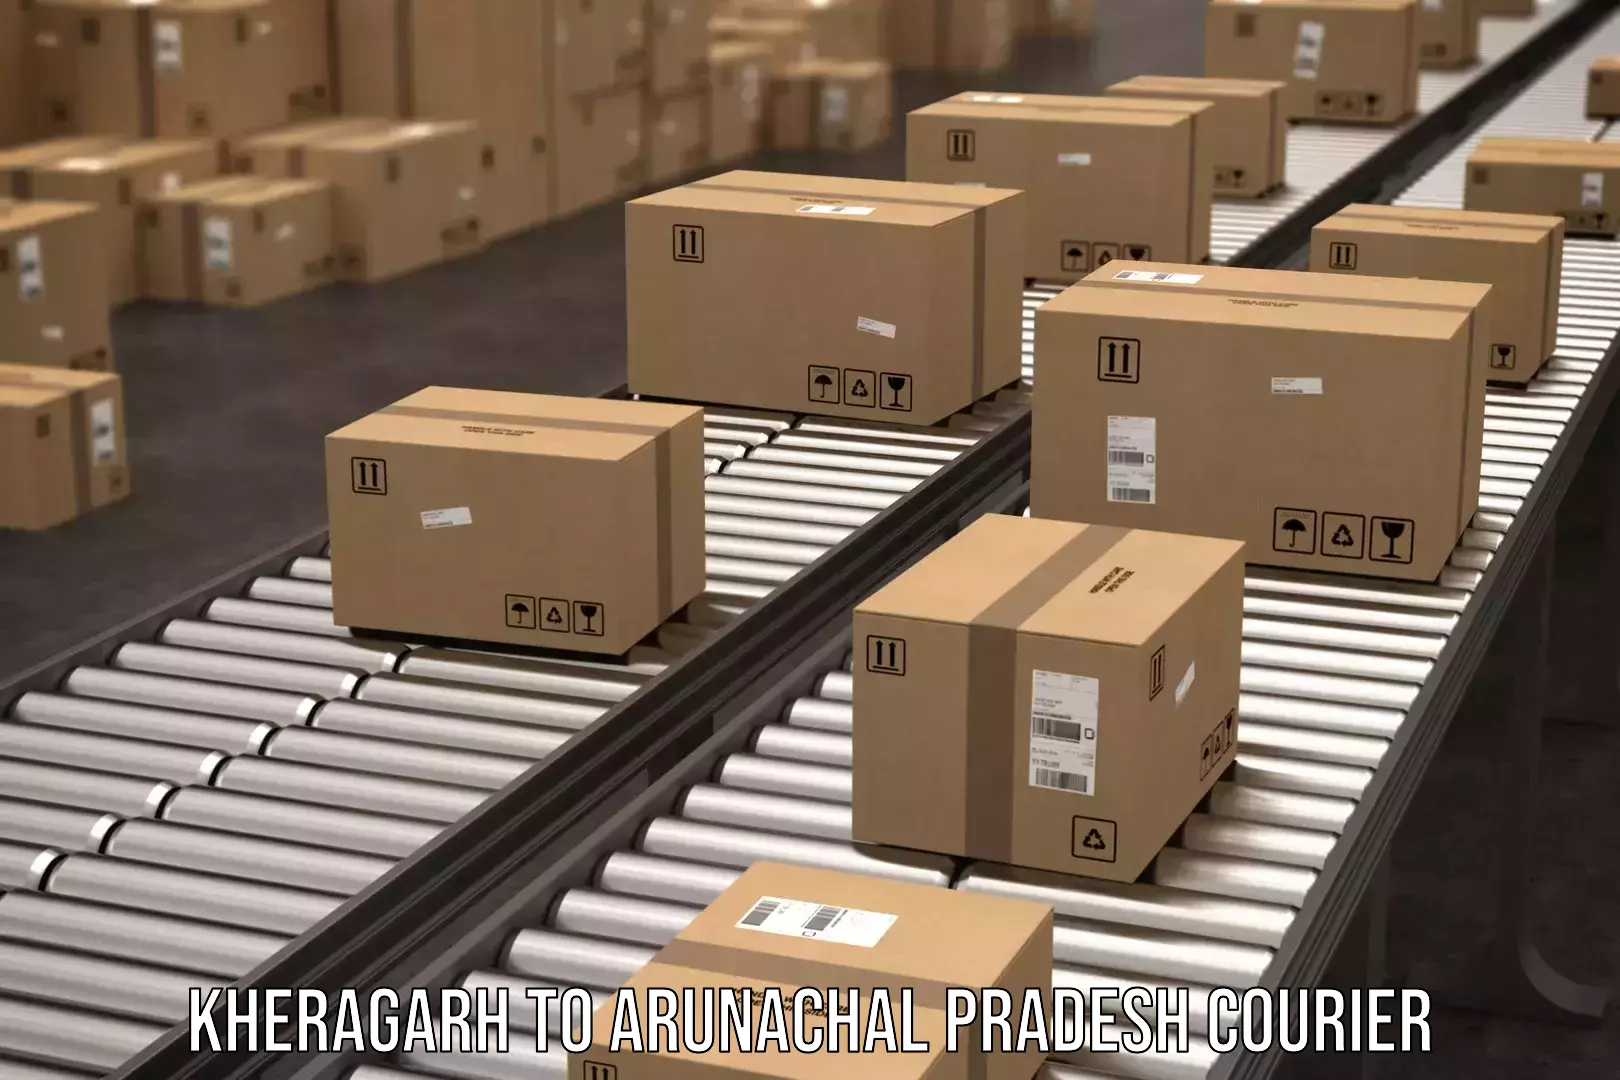 Automated shipping processes Kheragarh to Aalo